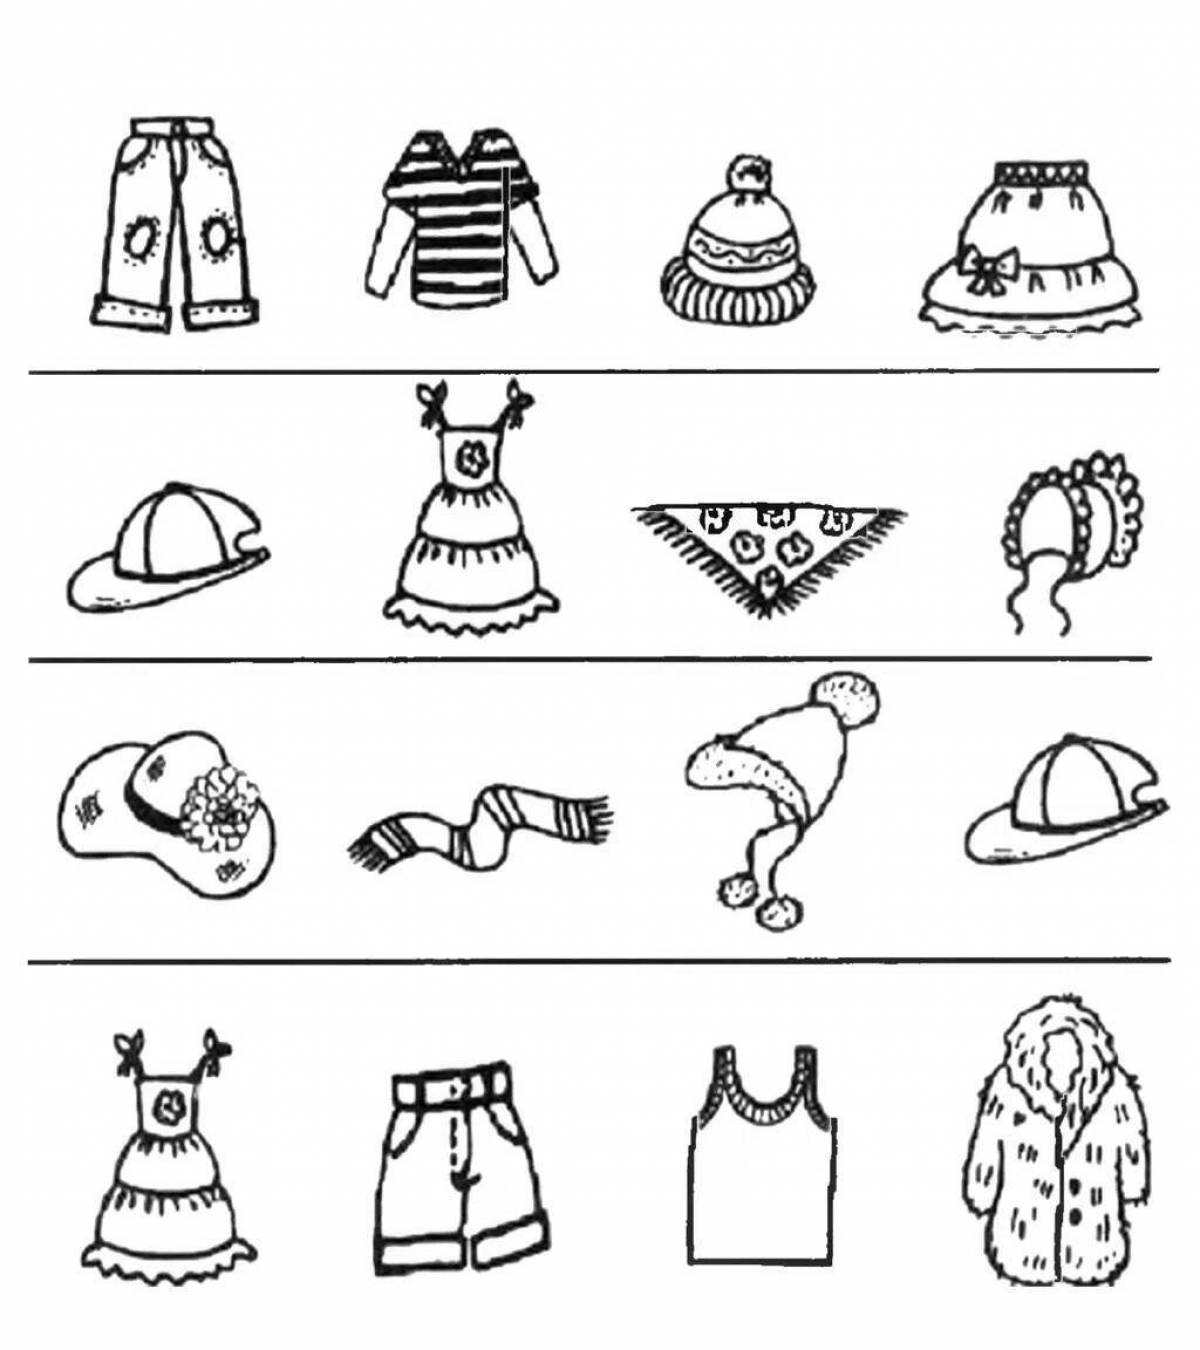 Saucy Clothes Coloring Page for 4-5 year olds